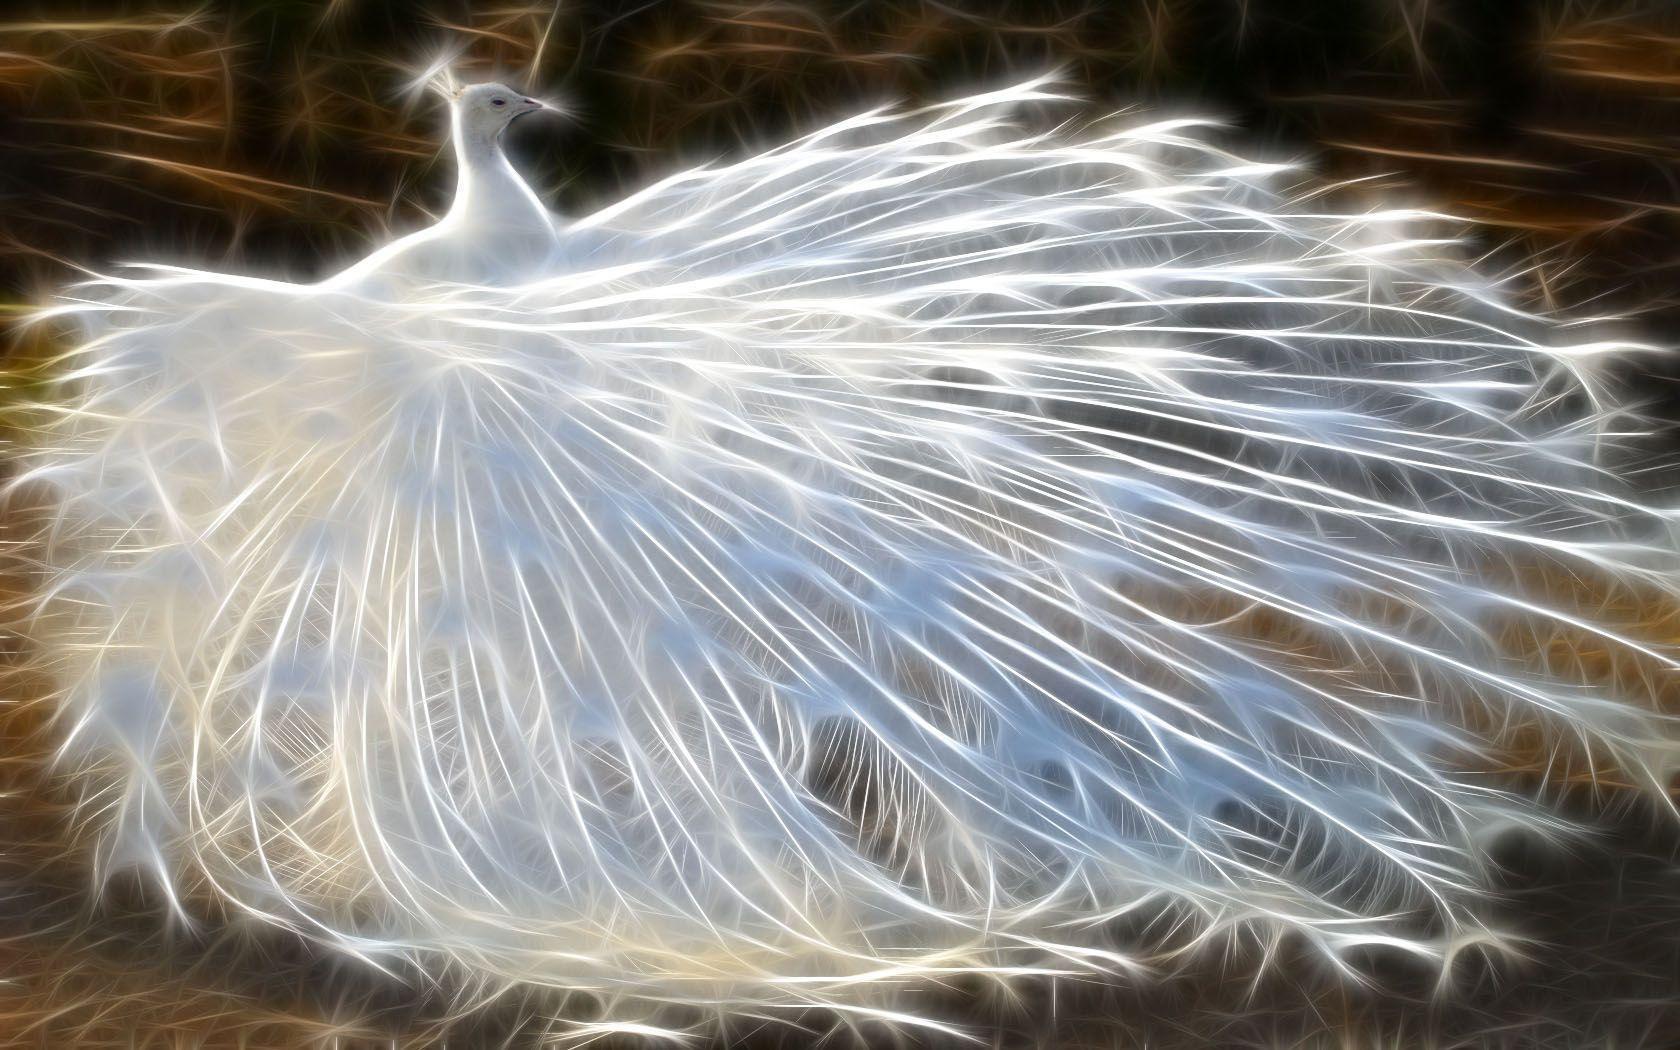 image of peacock